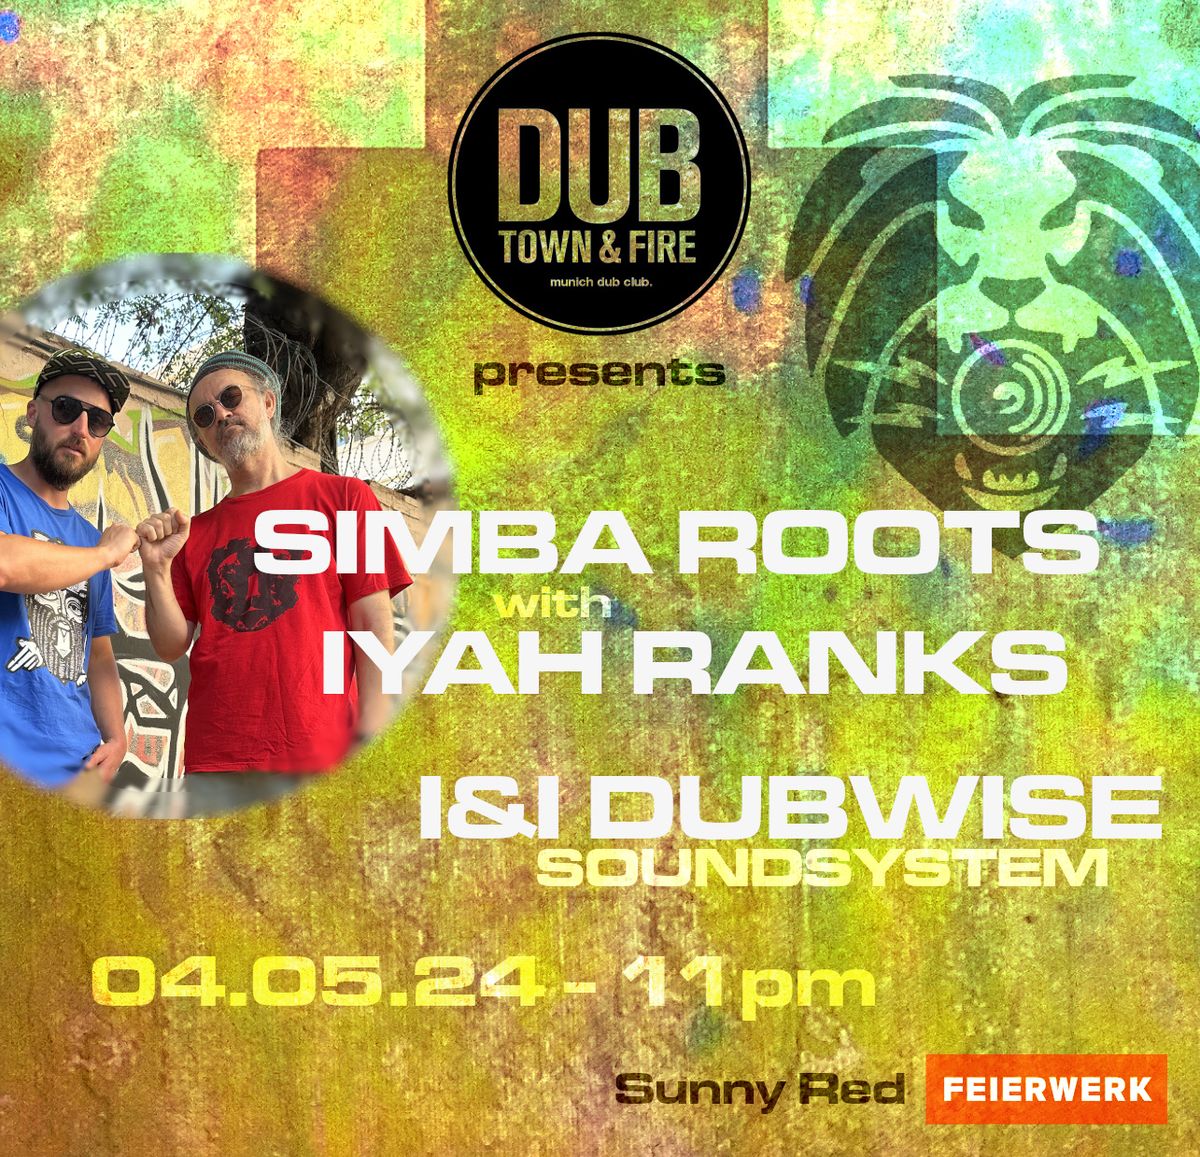 Dubtown&Fire: Simba Roots ft. Iyah Ranks, I&I Dubwise Soundsystem